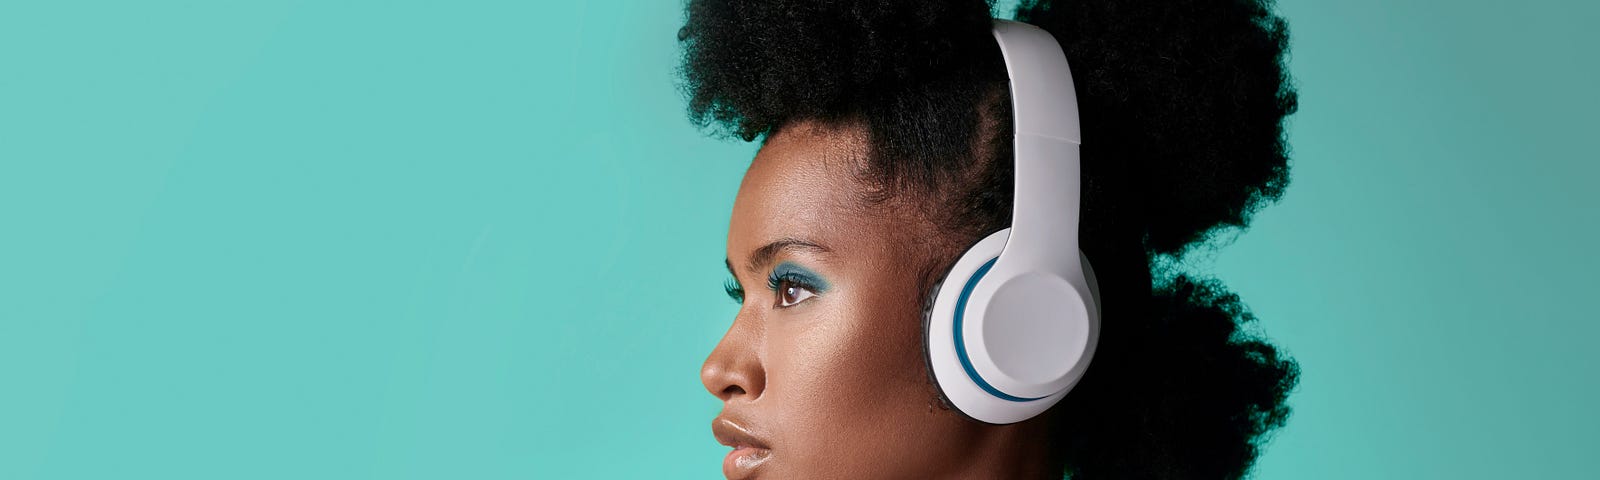 A woman listening to headphones in front of a teal wall.